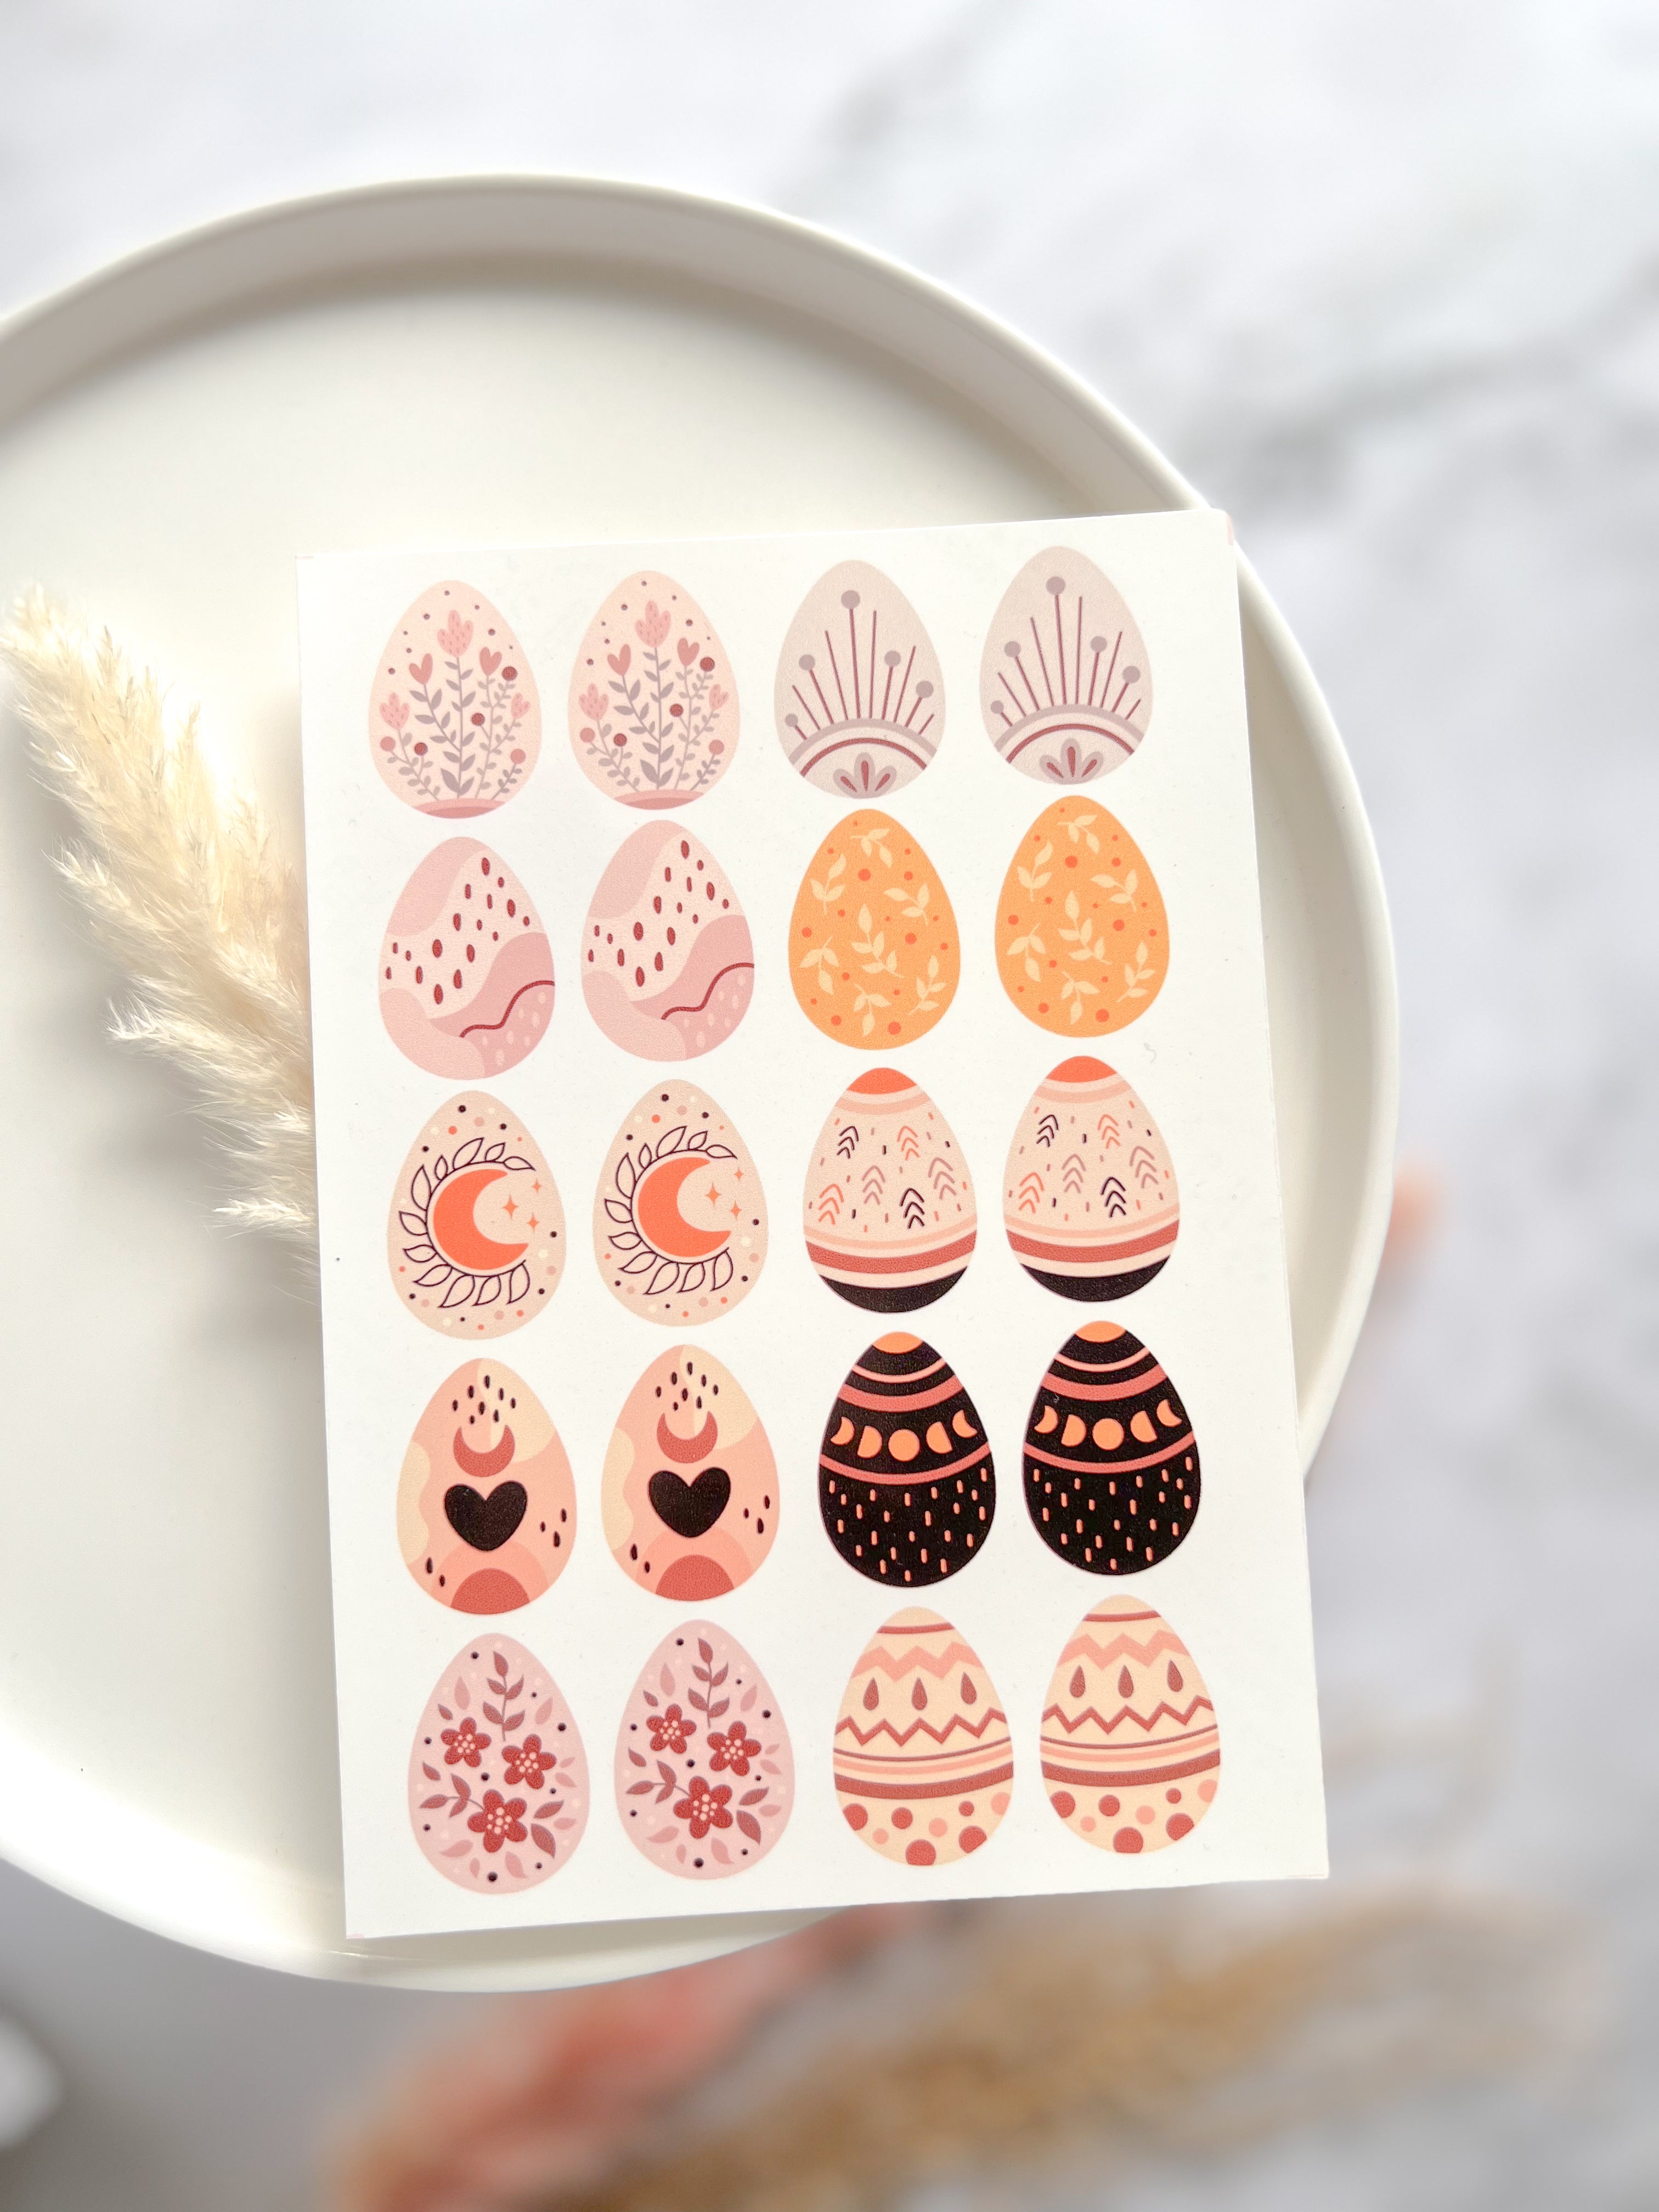 1 Sheet, Approx 13x90cm, Easter Egg Print Water Decal Image Transfer for Polymer Clay / Ceramics